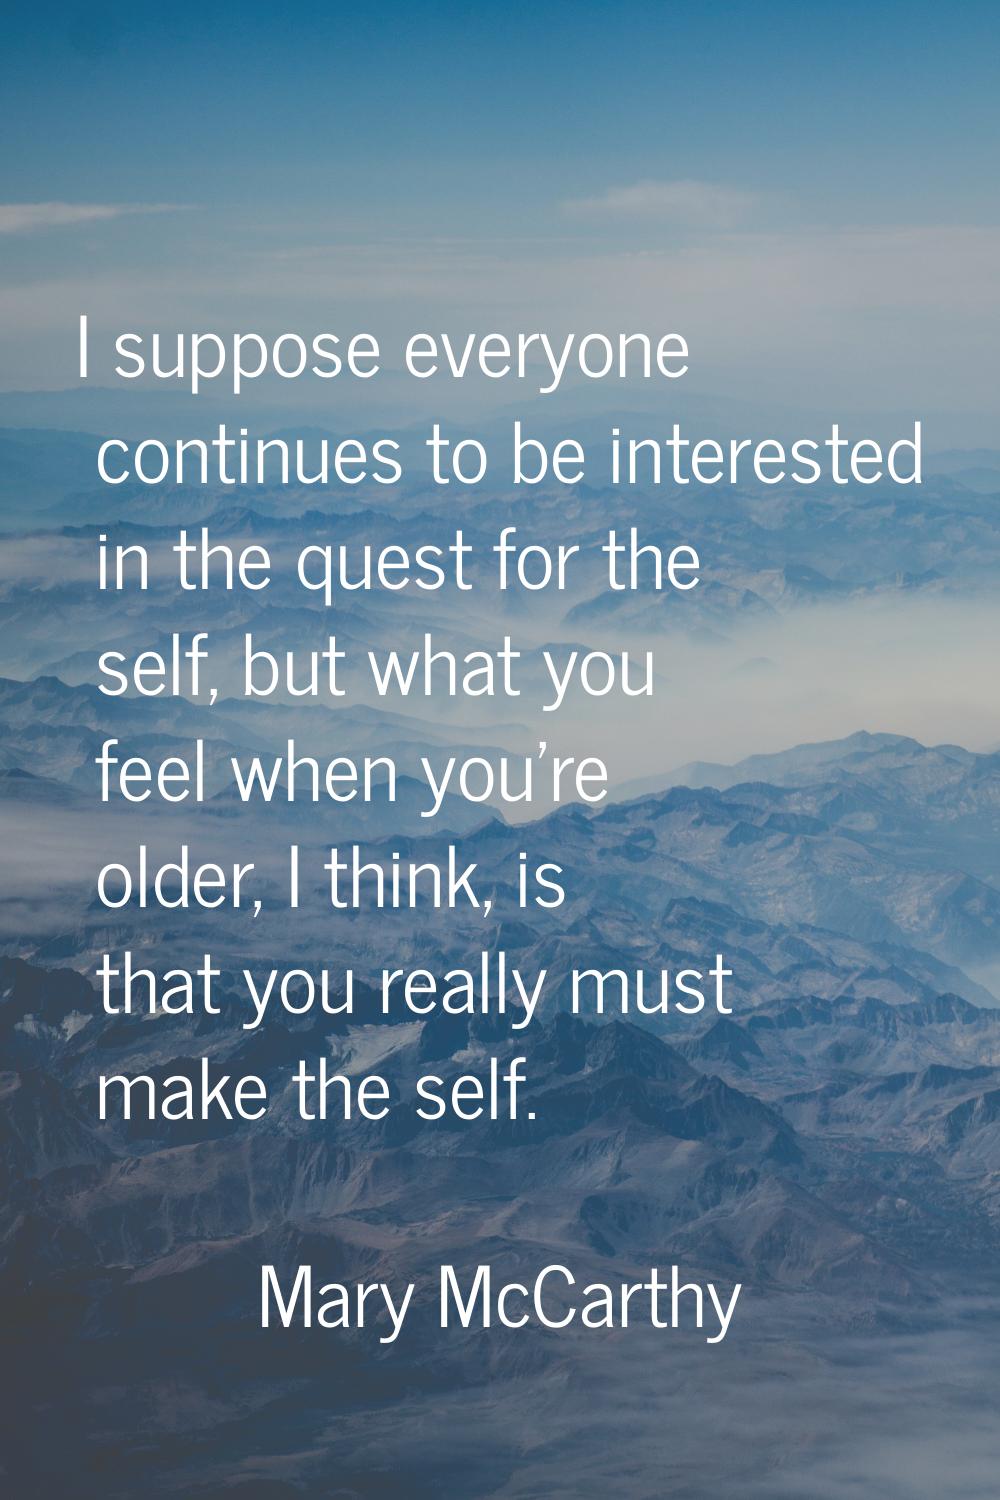 I suppose everyone continues to be interested in the quest for the self, but what you feel when you